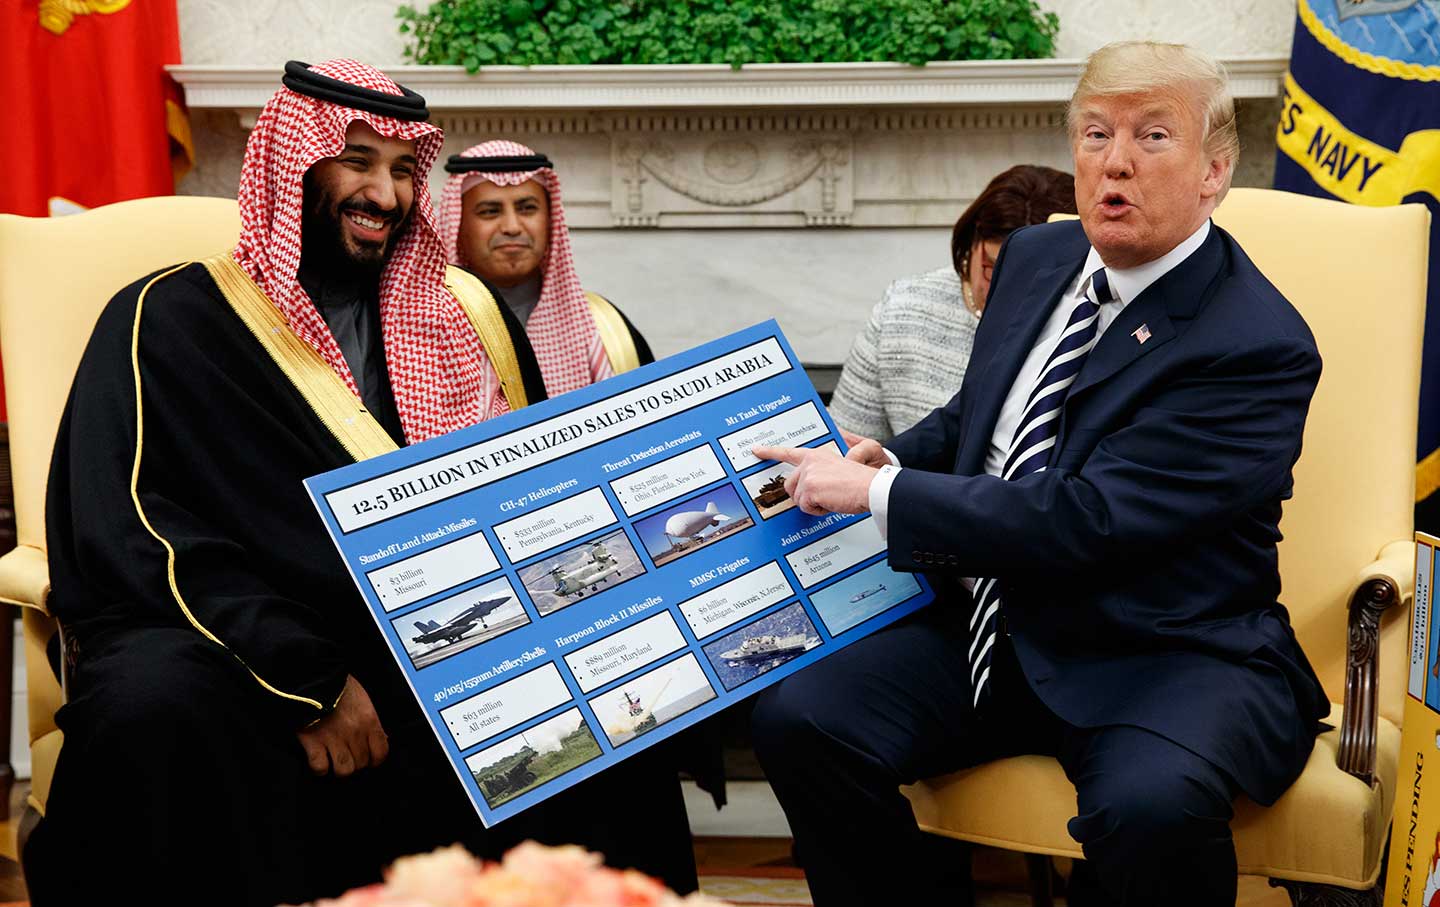 Trump holds a chart of weapon sales as he welcomes Saudia Arabia's Crown Prince Mohammed bin Salman in the Oval Office in 2018.